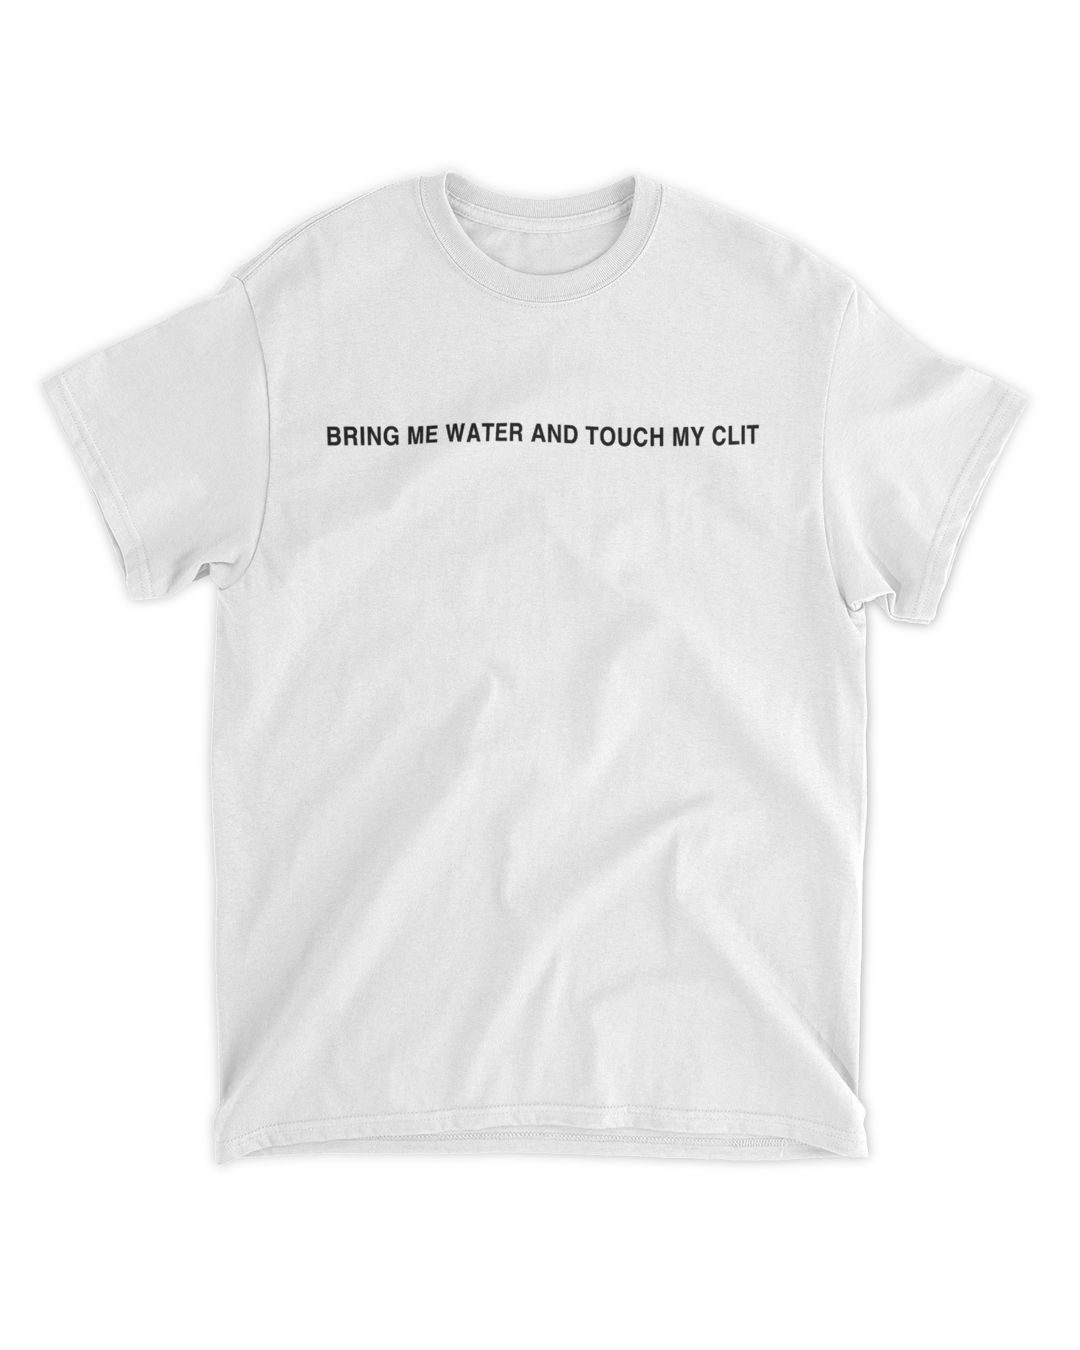 Bring Me Water And Touch My Clit Tee Shirt | Pletee